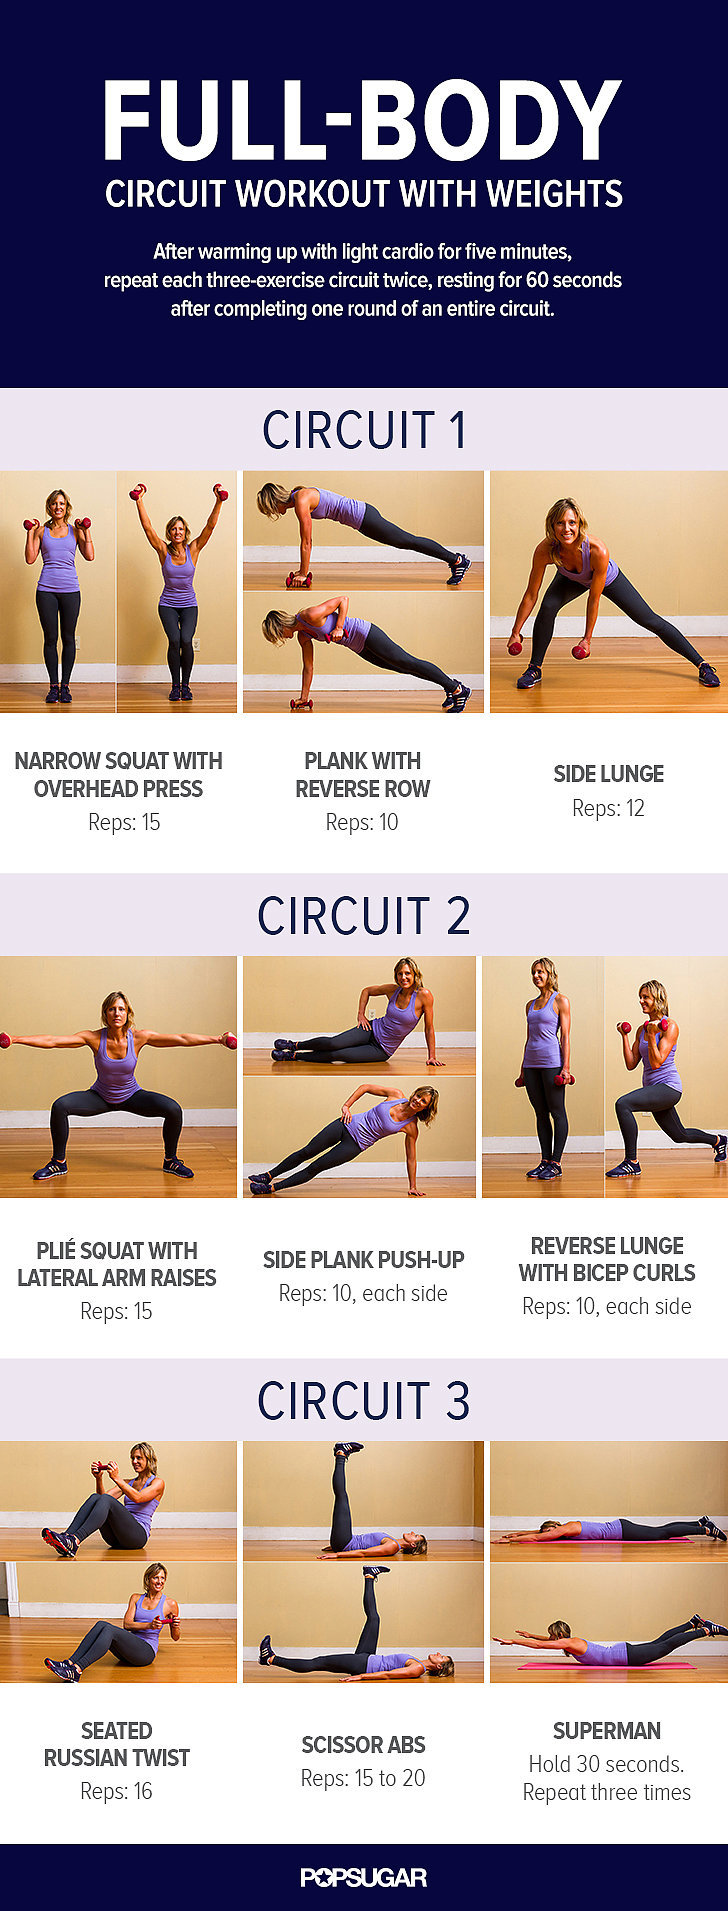 Full-Body Circuit Workout Poster | POPSUGAR Fitness